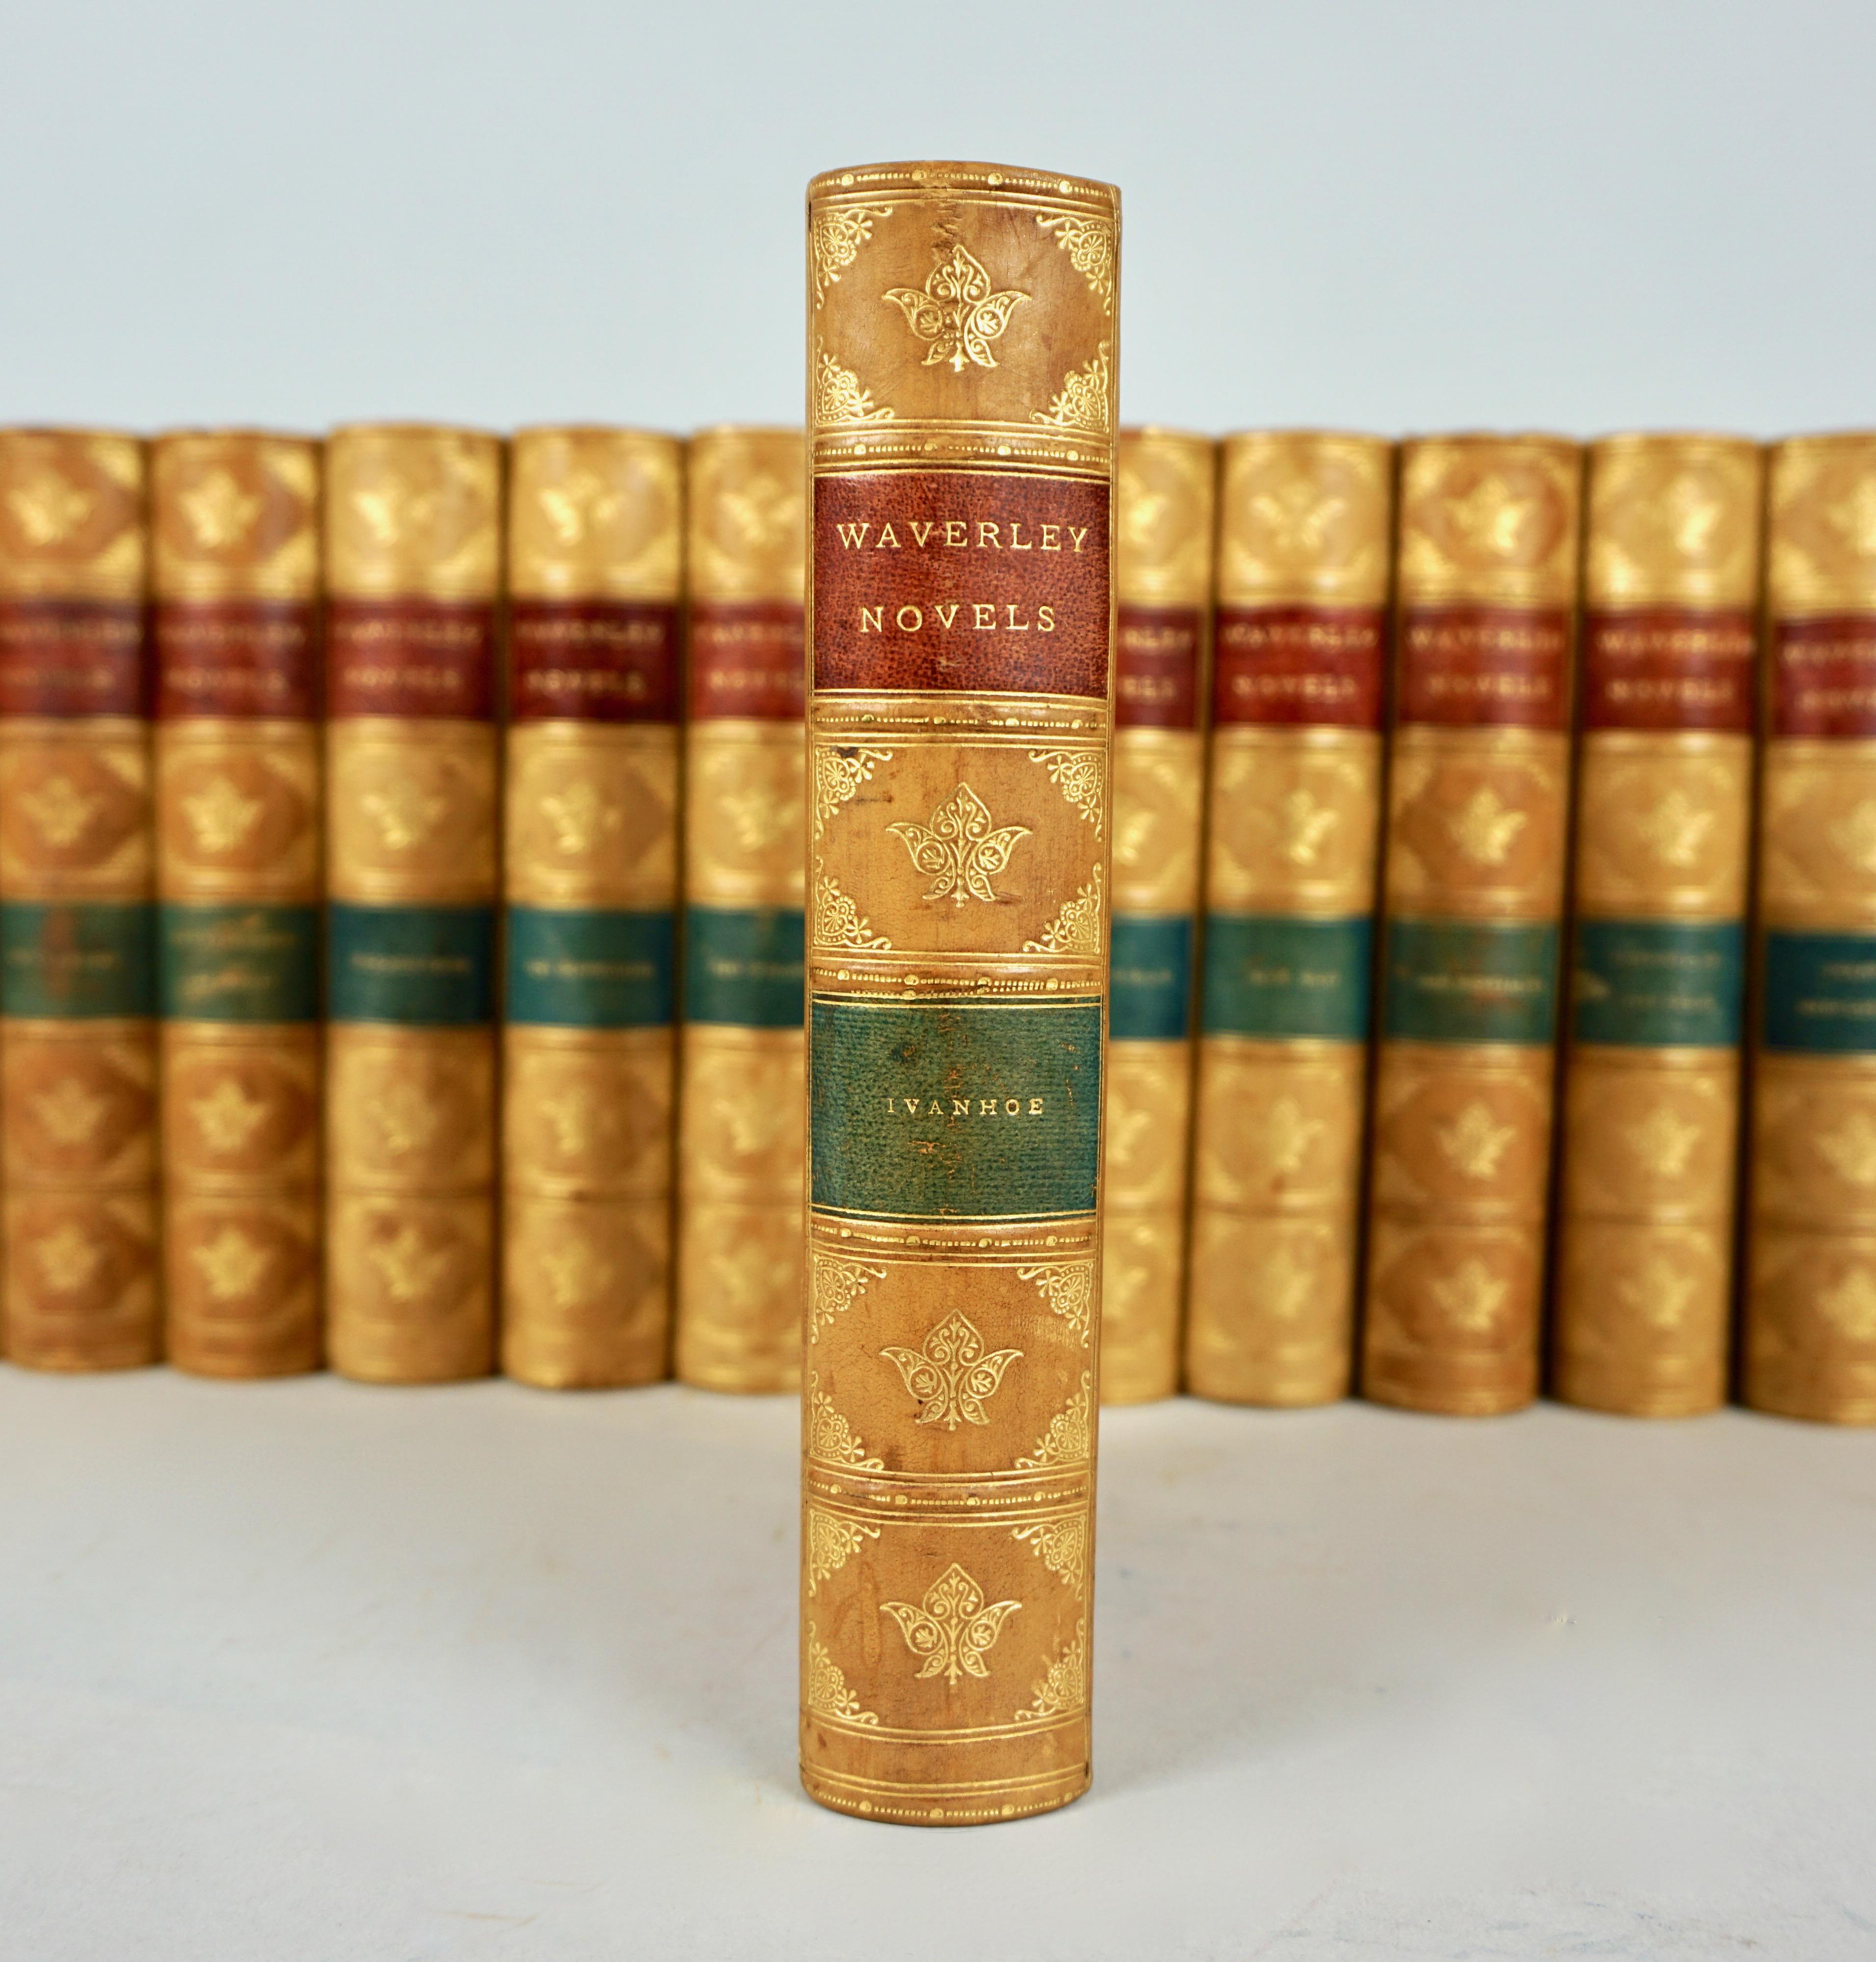 Victorian Waverly Novels 'The Works of Sir Walter Scott' in 25 Volumes Bound in Leather